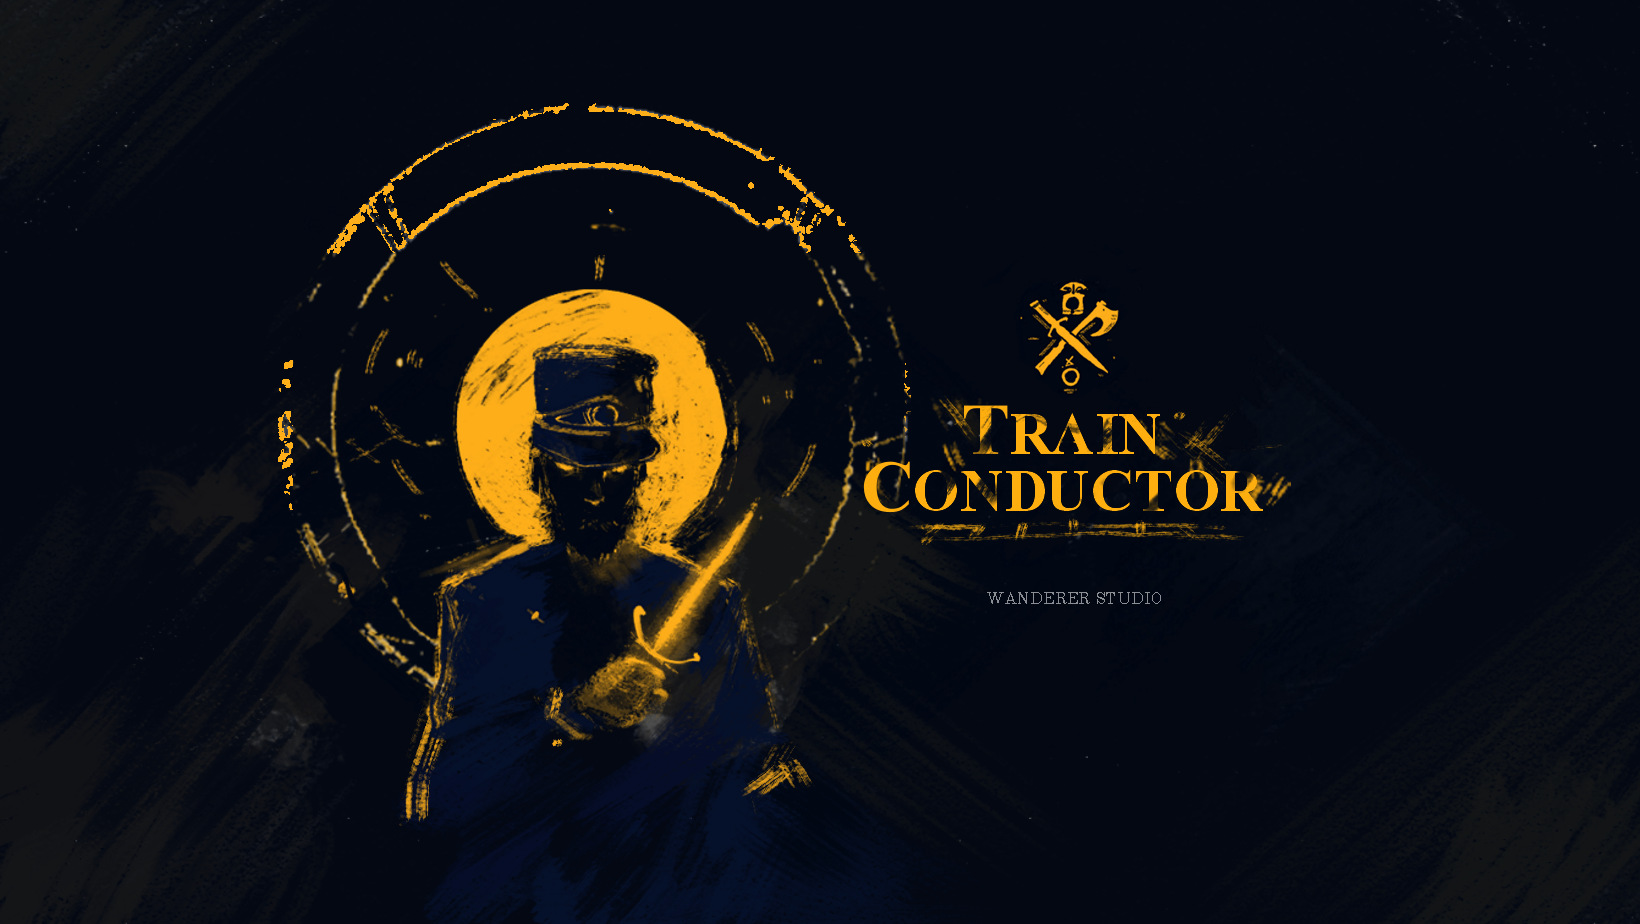 Train Conductor v0.1 (only work for Firefox)